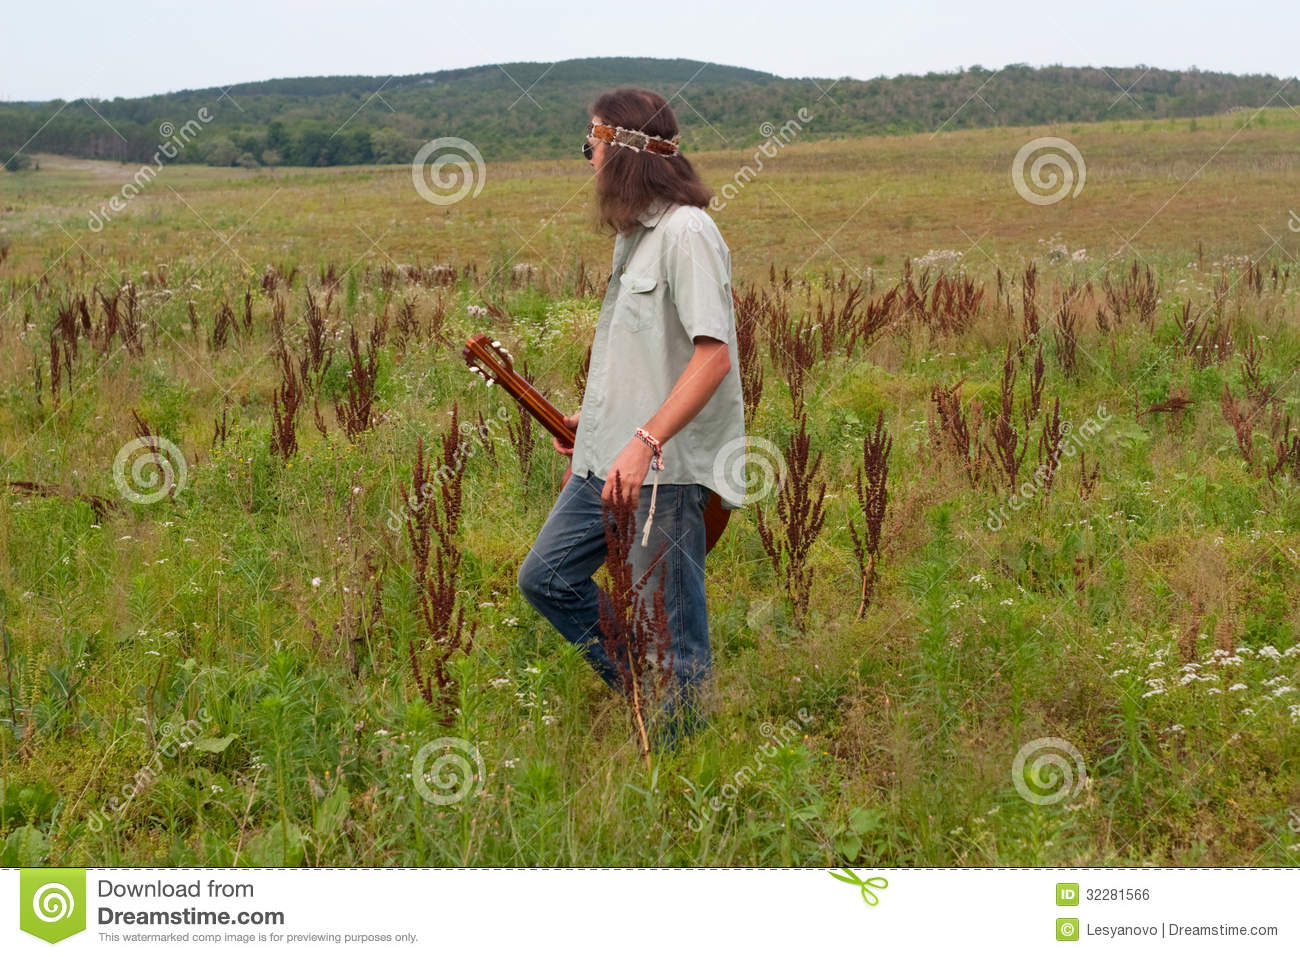 Hippie Musician With Guitar On The Meadow Royalty Free Stock Image